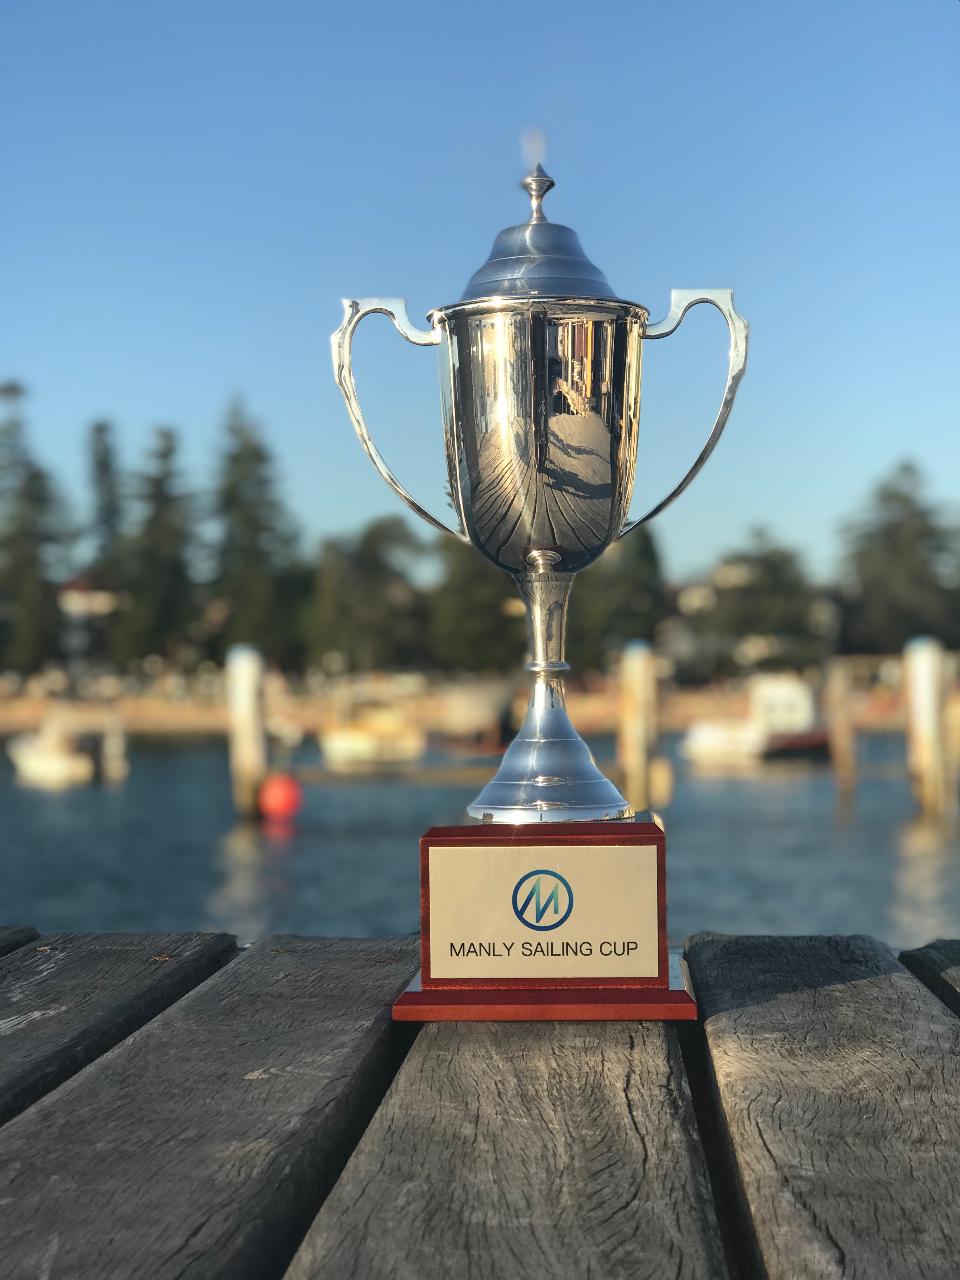 Manly Sailing Cup